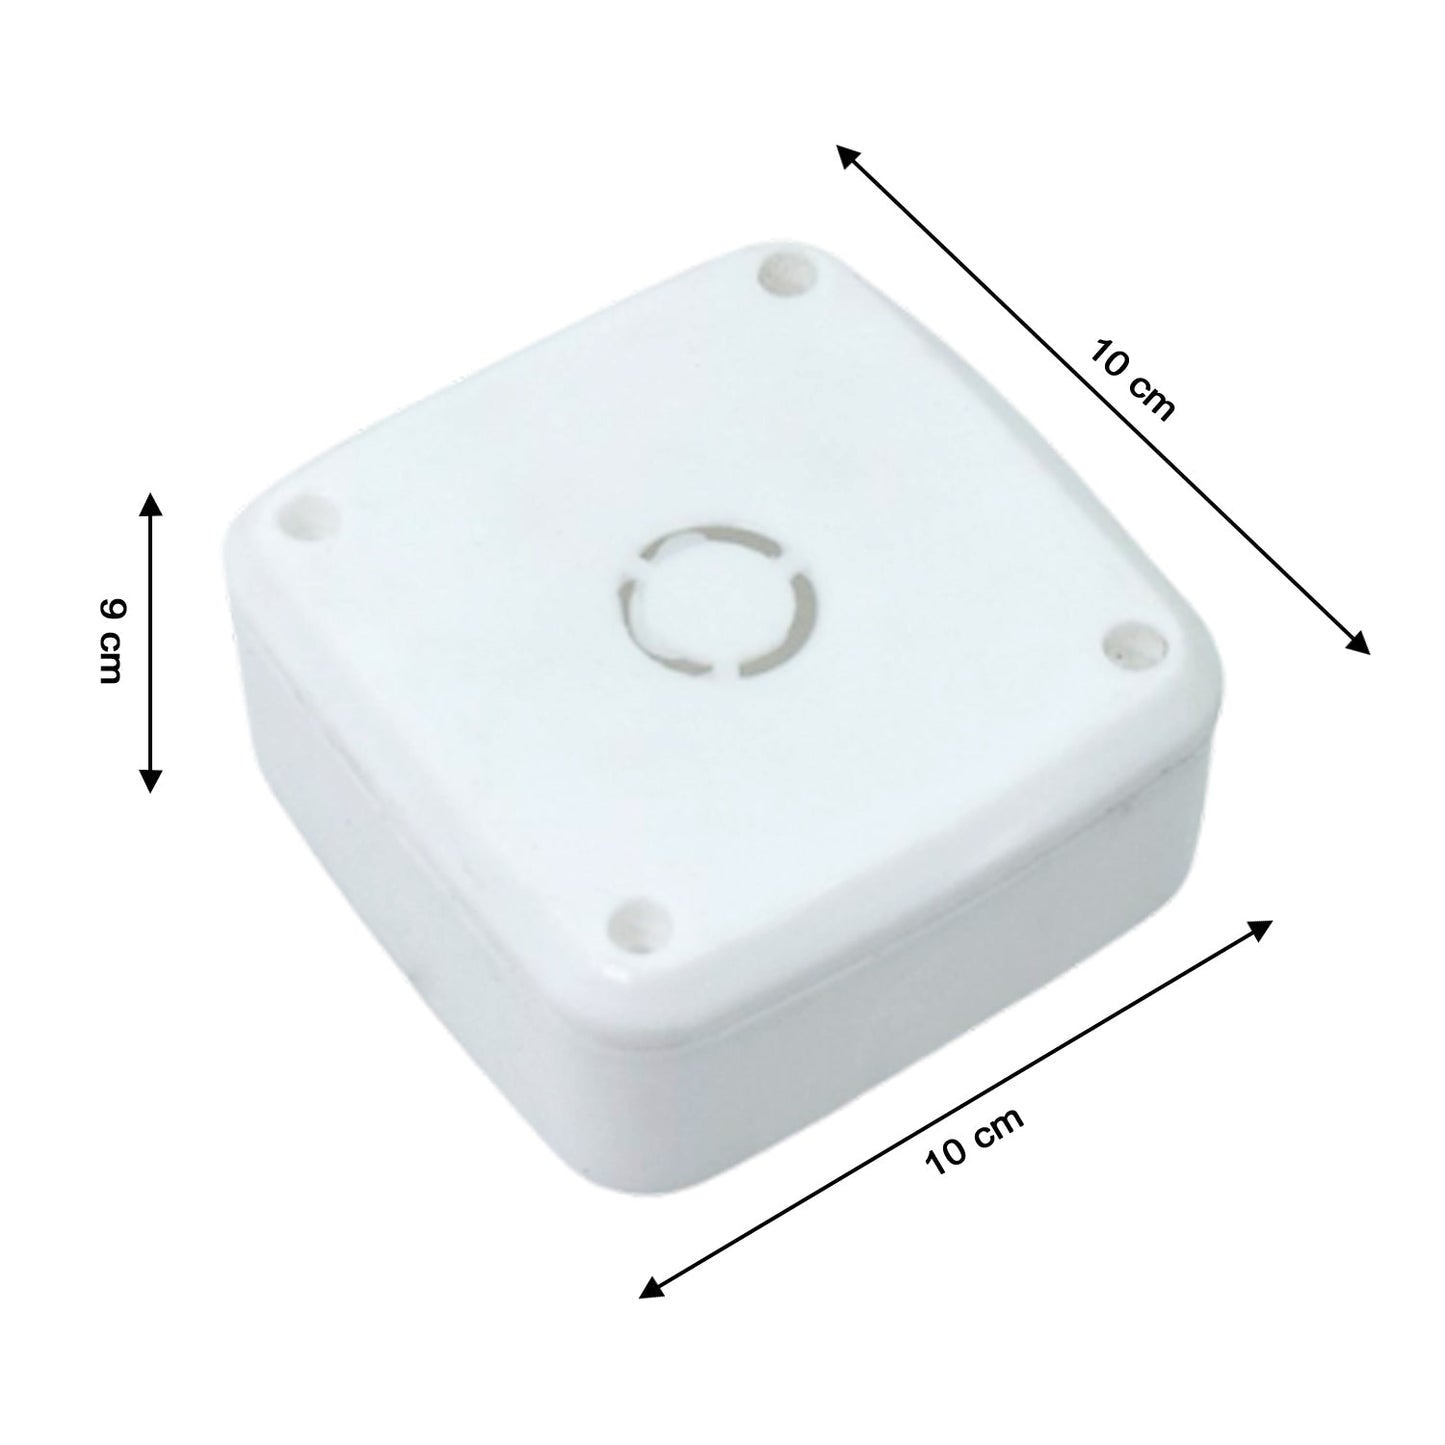 9032 Camera Mounting Box used for storing camera which helps it from being comes in contact with damages. 